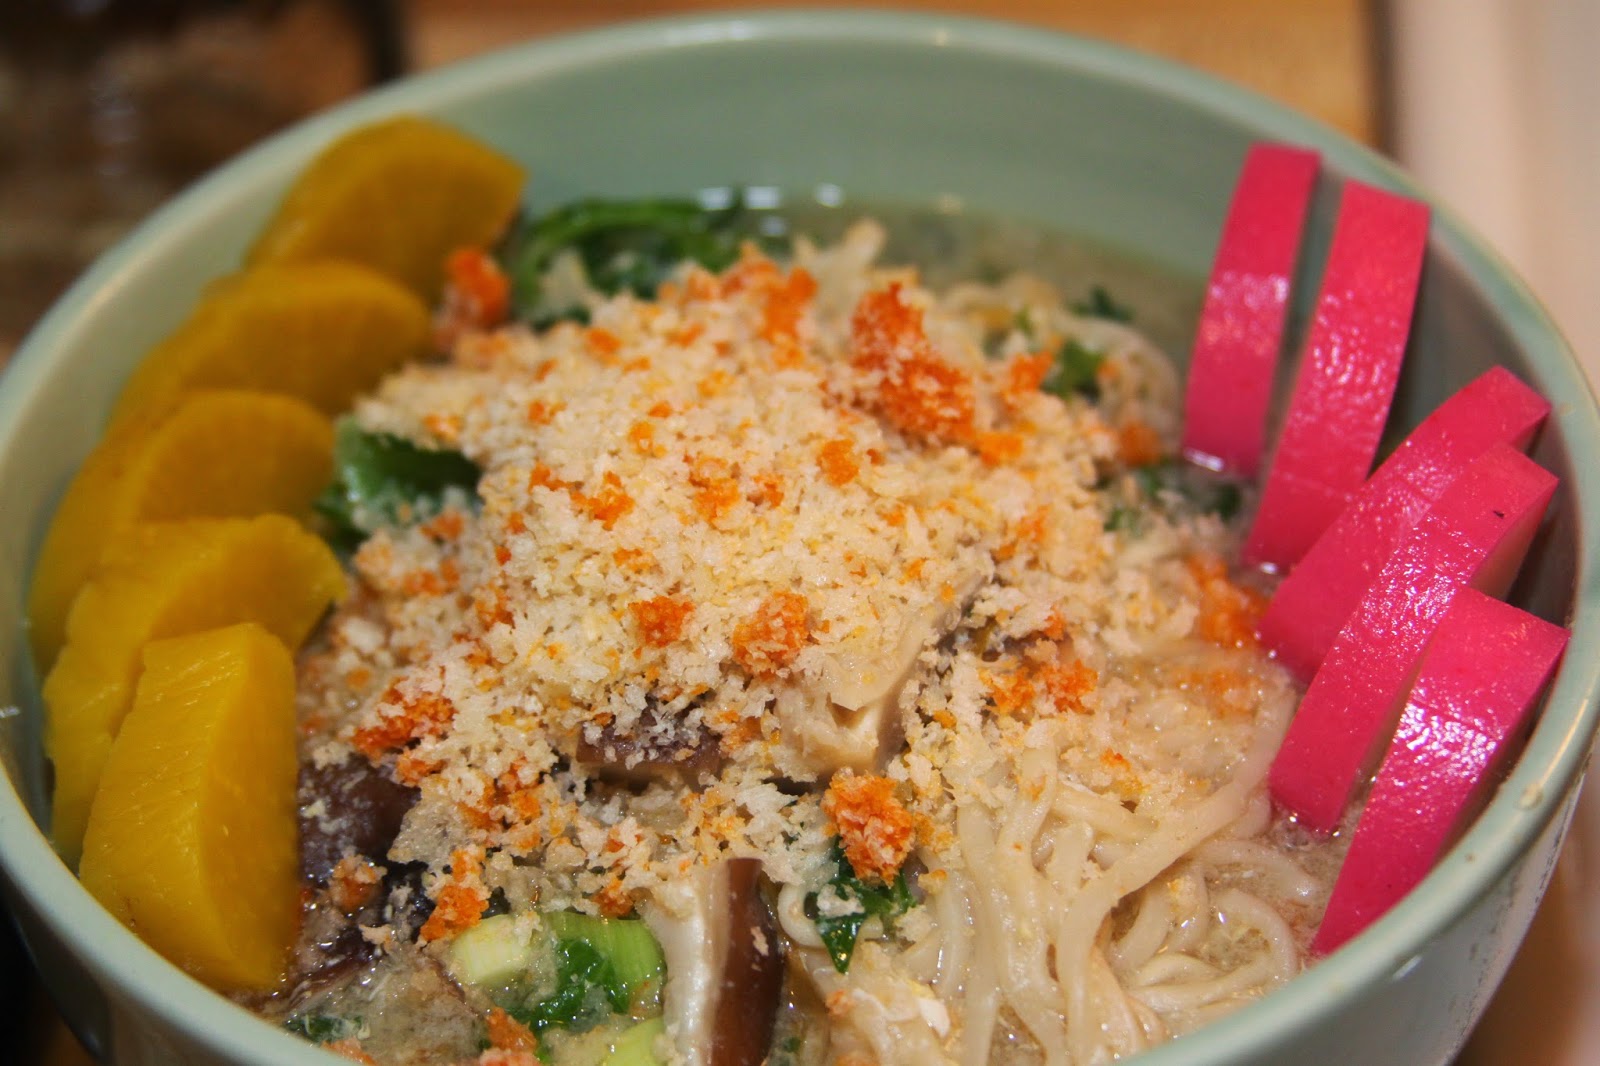 For the Love of Food: Meatless Monday: Vegetable Ramen Soup